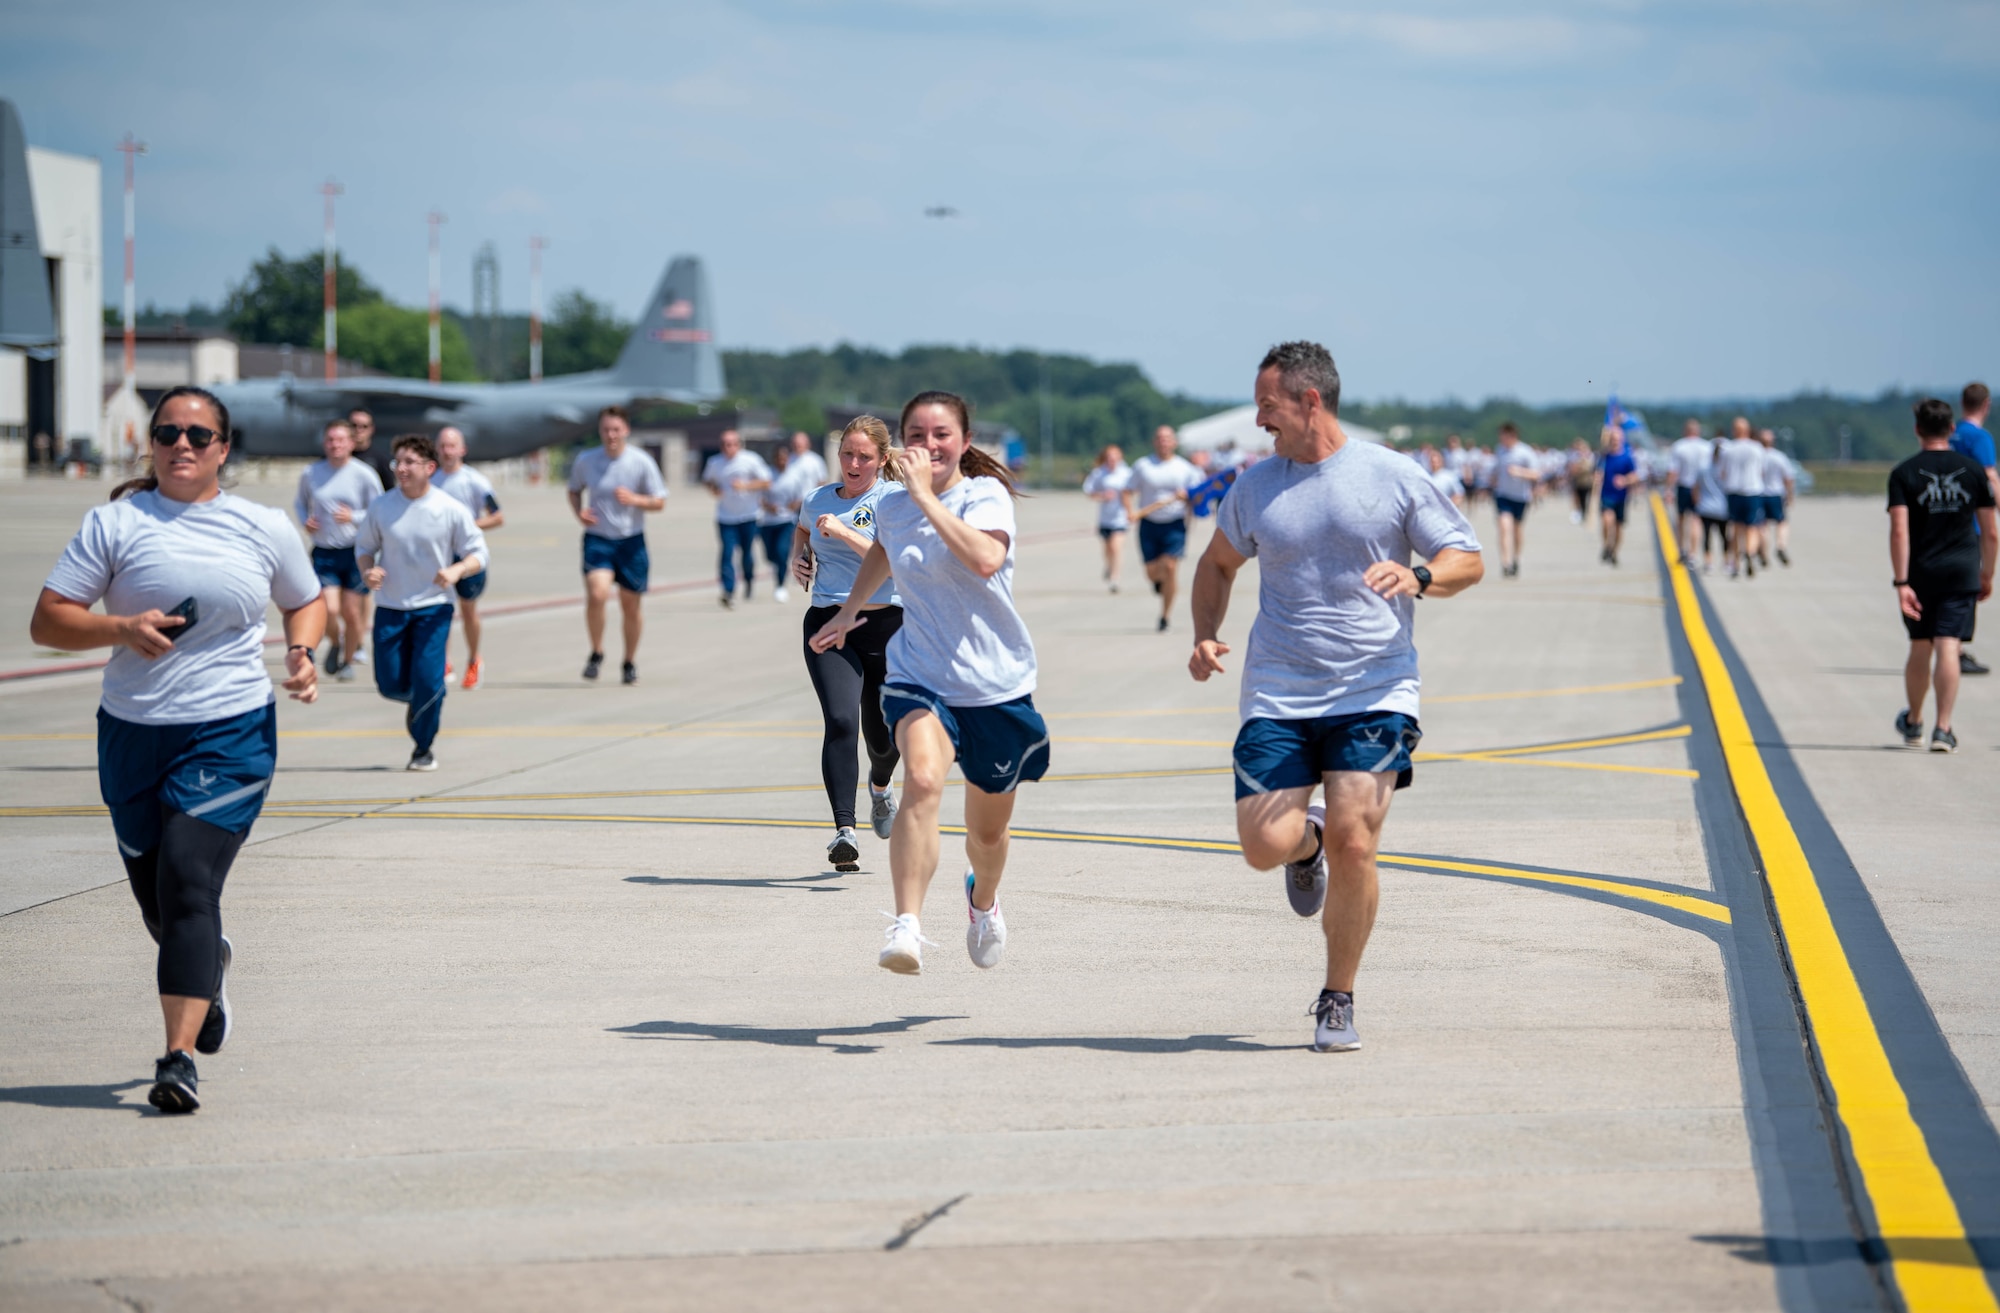 Members of the 86th Airlift Wing celebrate Ramstein Air Base’s 70th Anniversary during a wing run at Ramstein Air Base, Germany, June 29, 2022